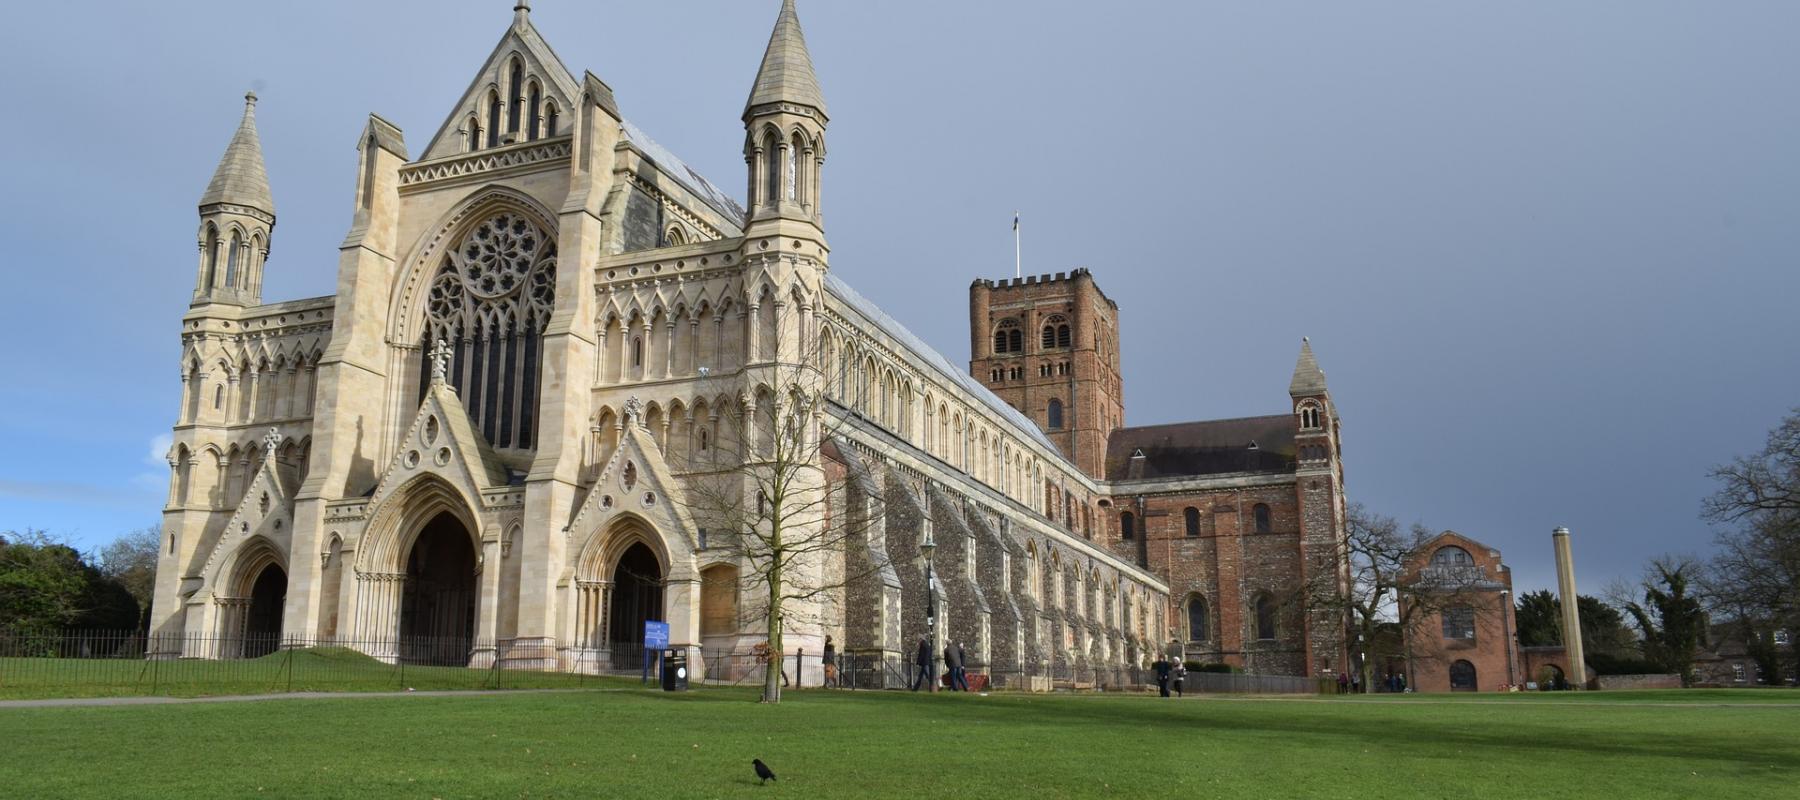 St Albans Cathedral.Photo: Elian Cristi Florescu from Pixabay